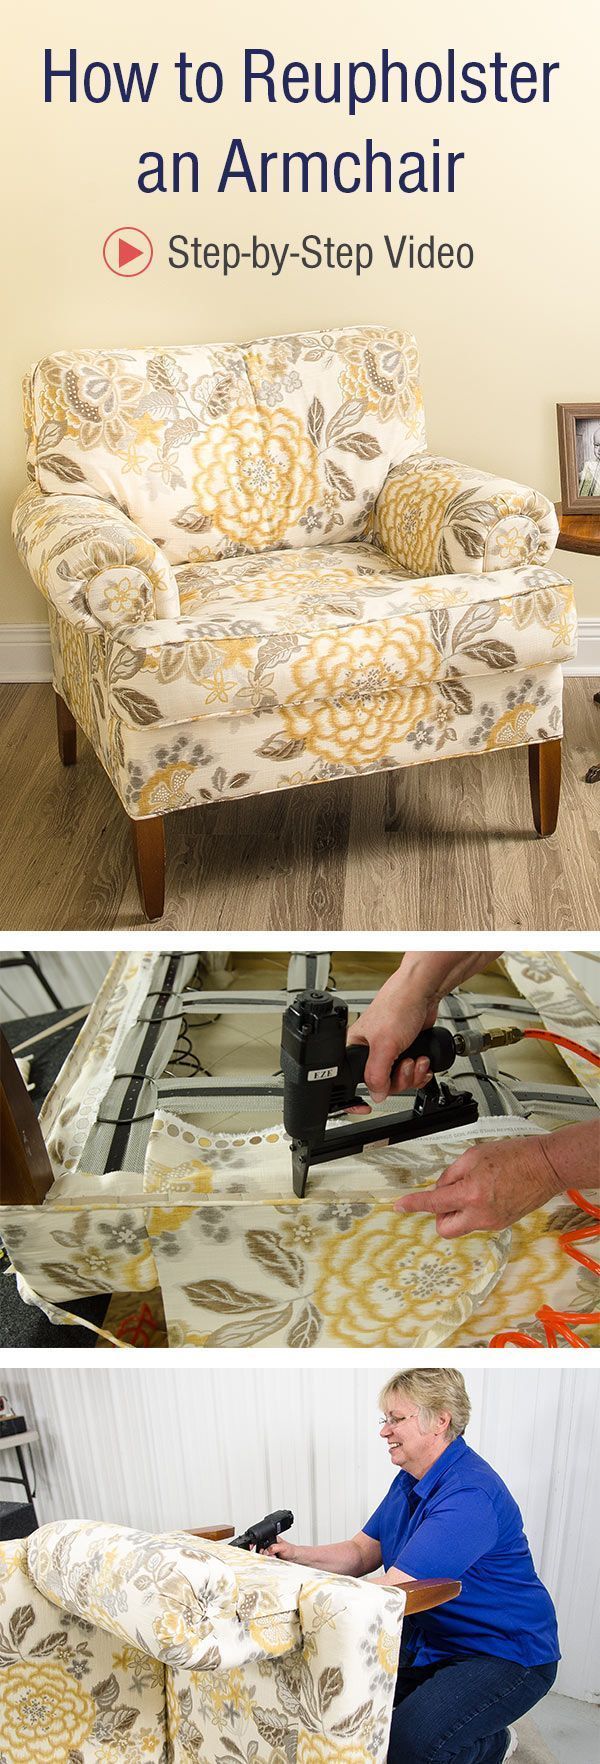 How to Reupholster an Armchair -   diy Furniture upholstery